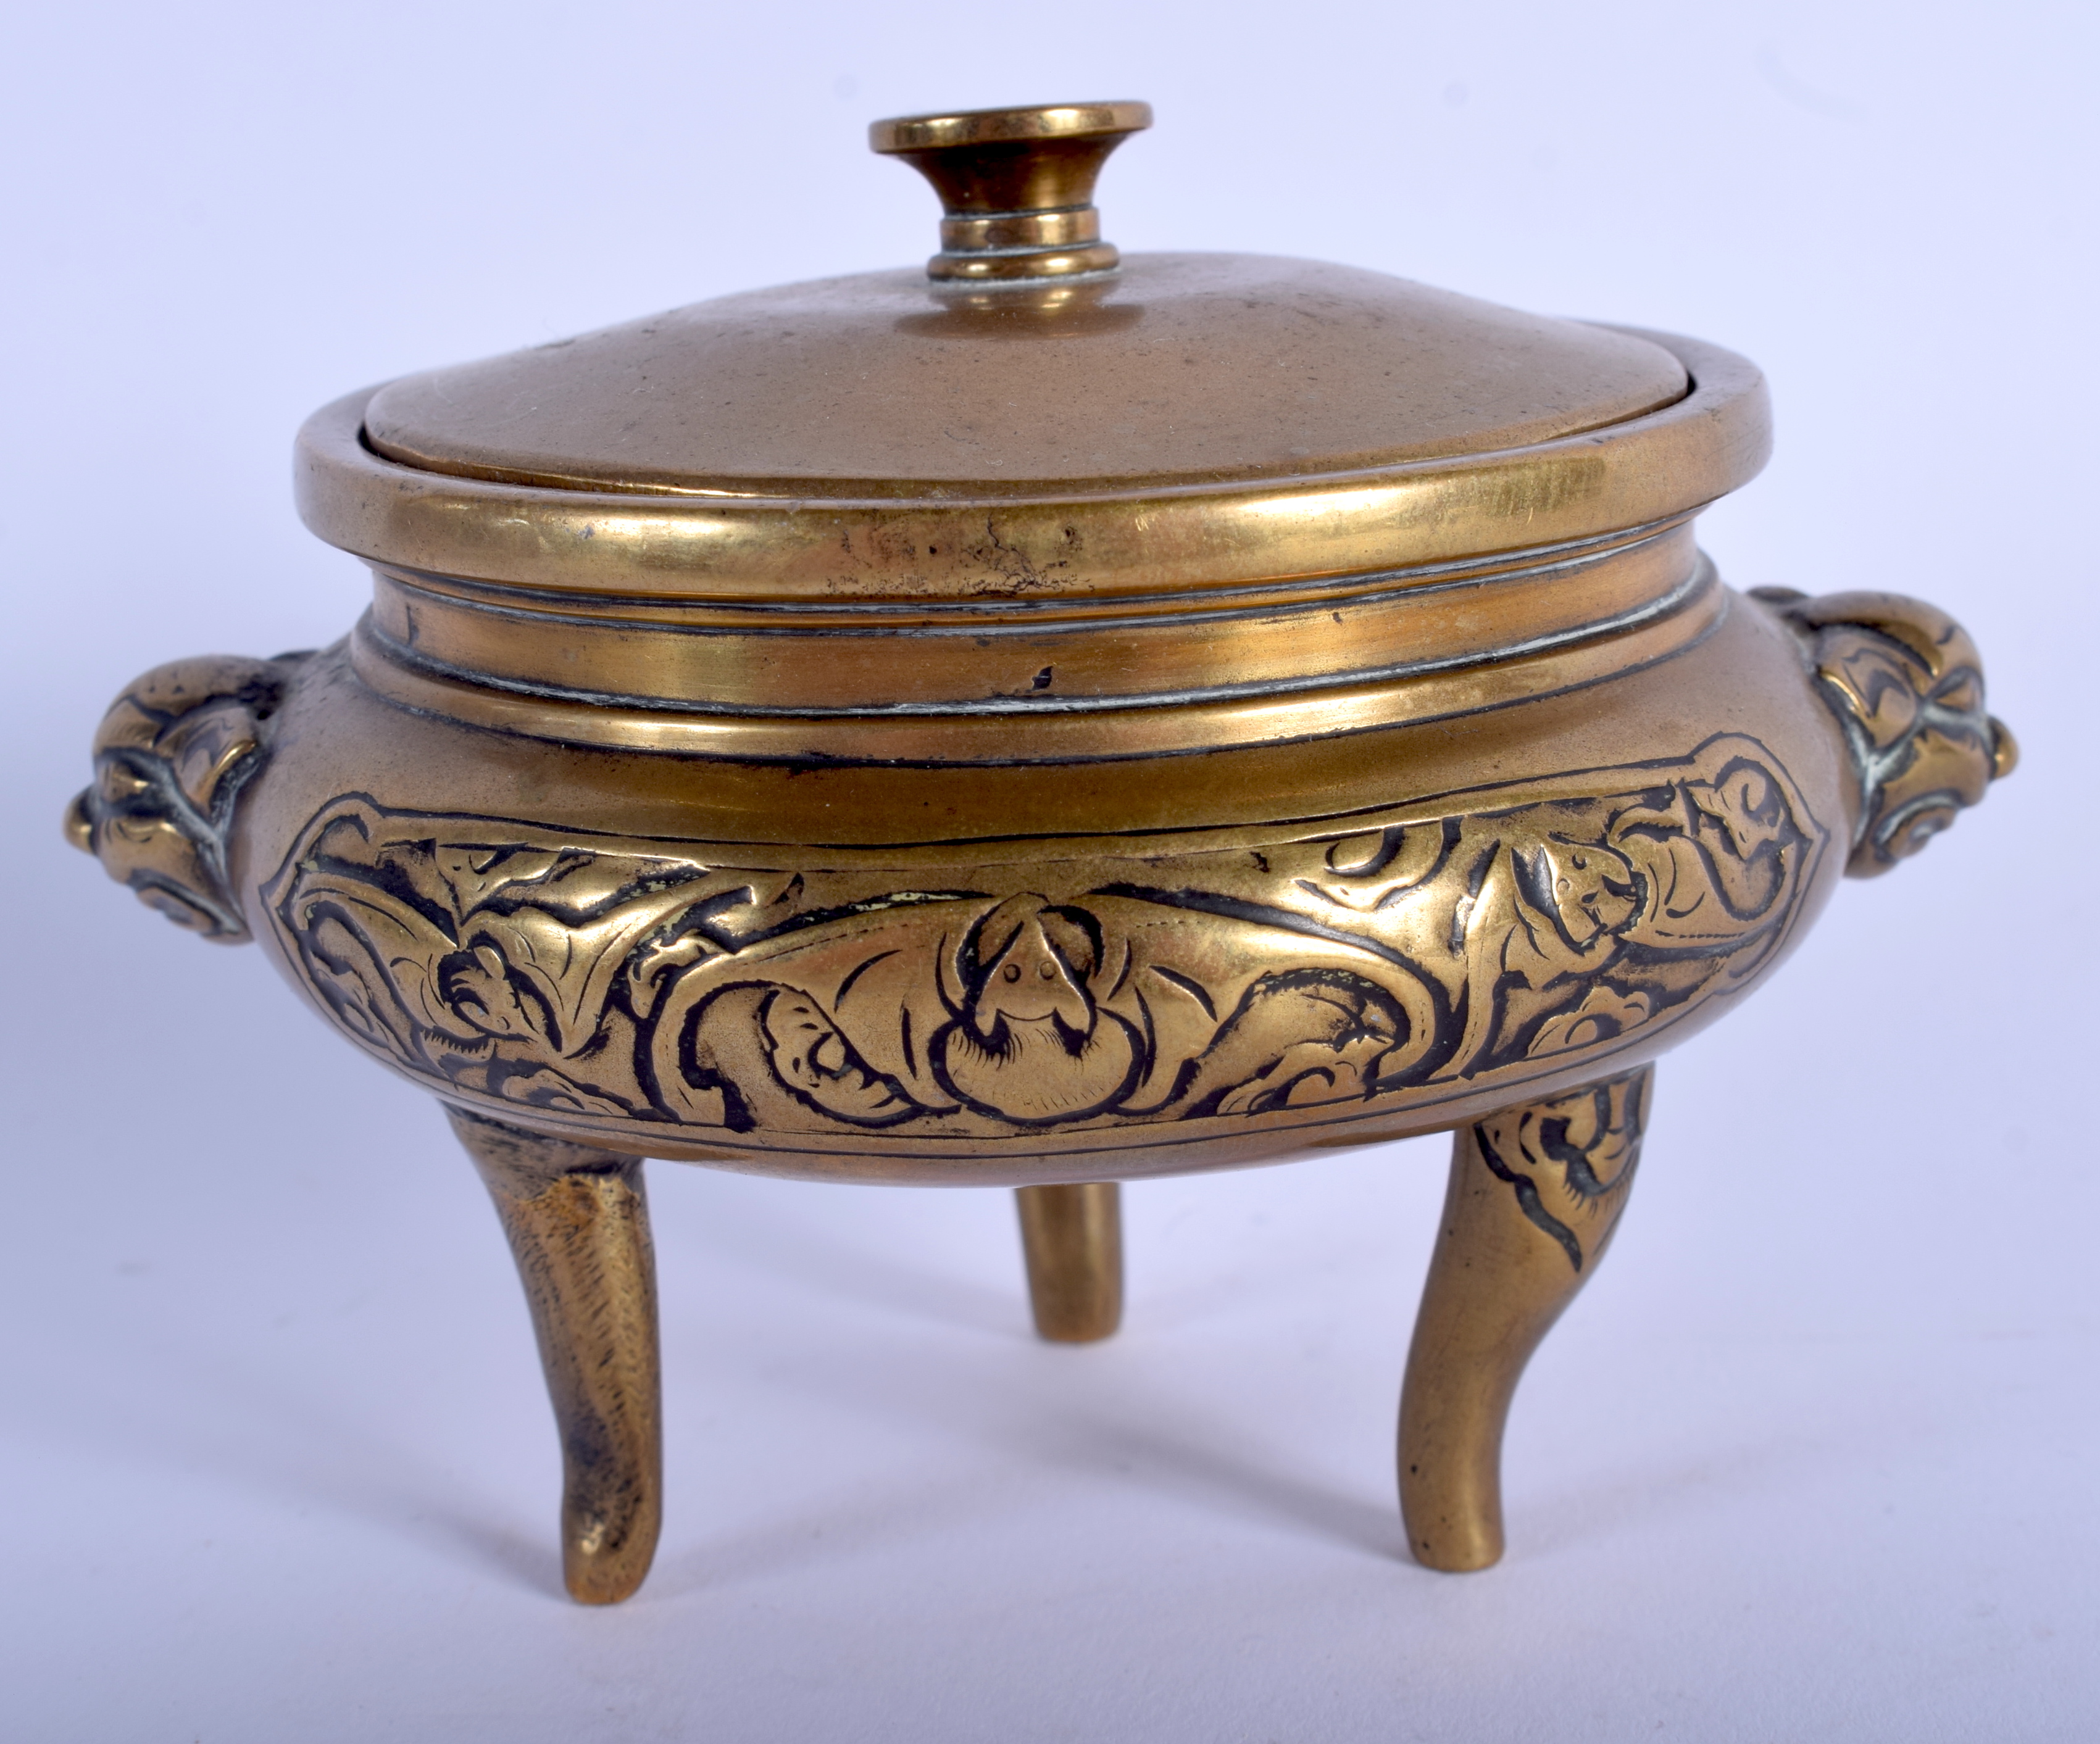 A 19TH CENTURY JAPANESE MEIJI PERIOD POLISHED BRONZE CENSER AND COVER decorated with bats. 10.25 cm - Image 2 of 4